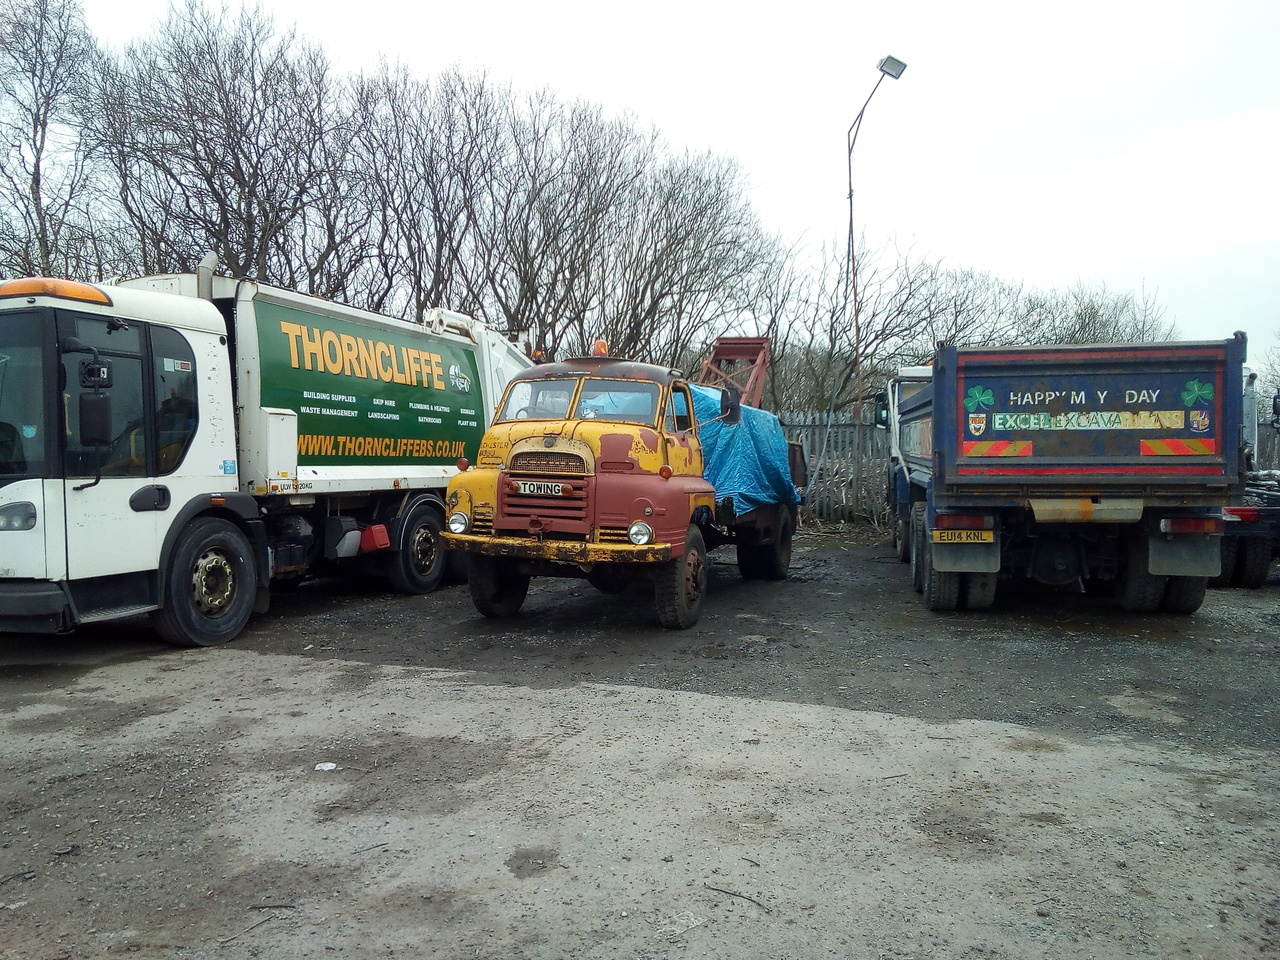 The bedford, now looking very small, sandwiched between a
26-tonne bin wagon, and a 32-tonne tipper truck.